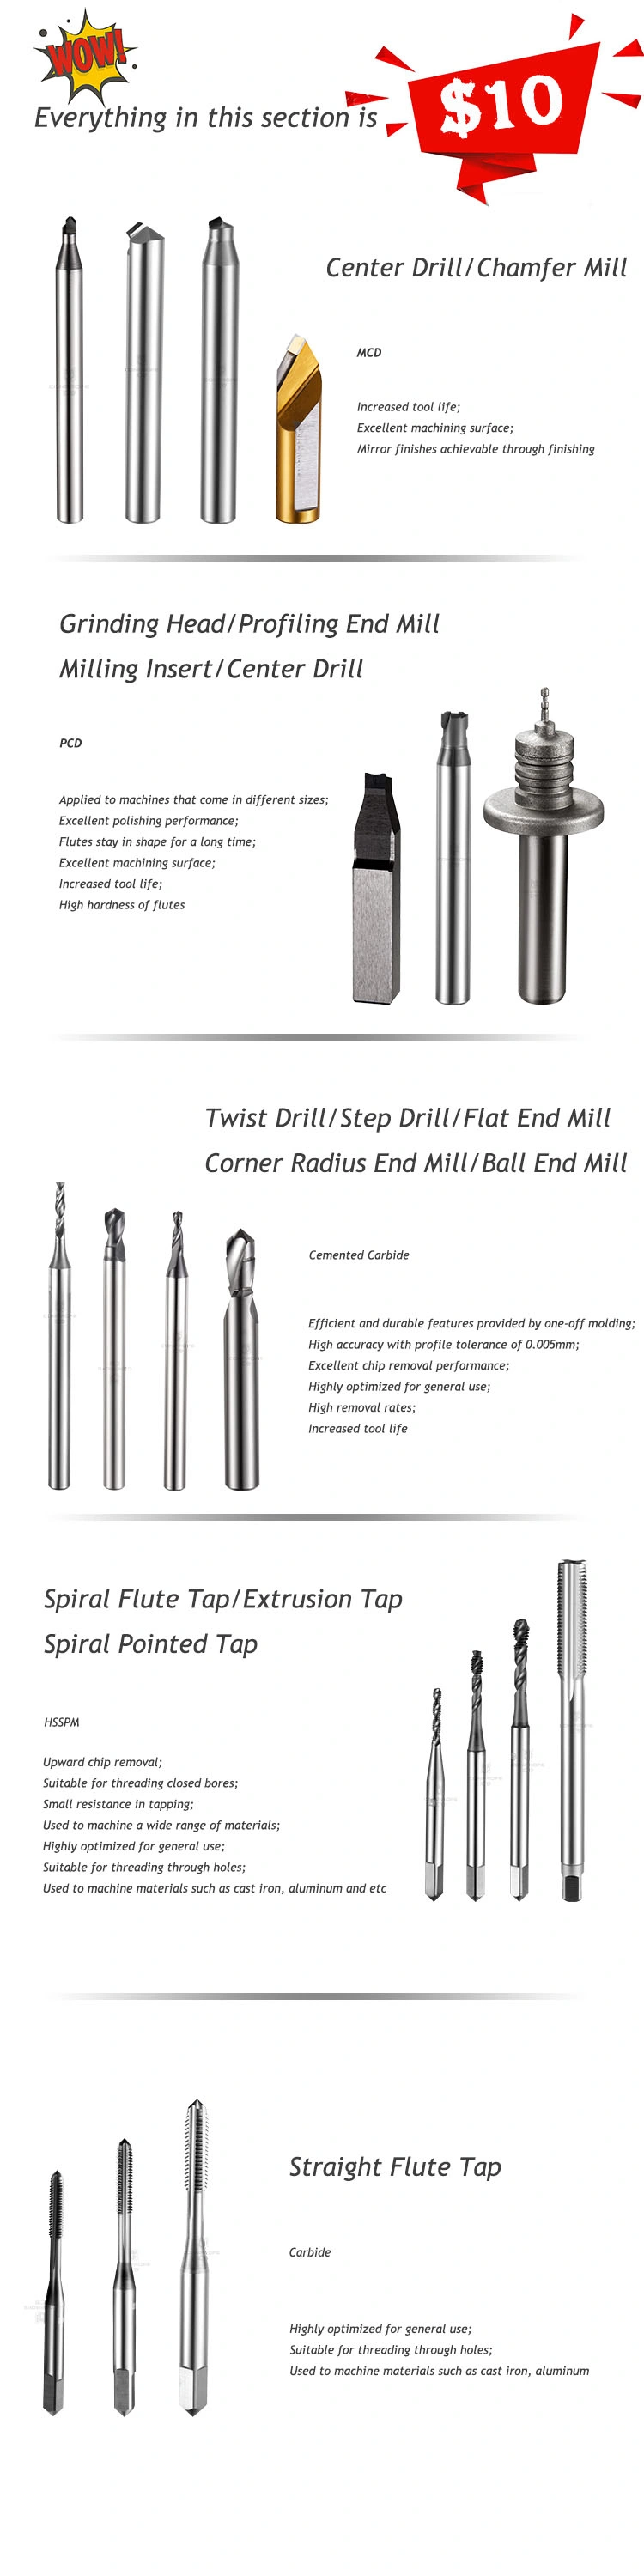 Solid Tungsten Carbide End Mill Types Of Milling Cutter Flat End Mill Fresas For Steel